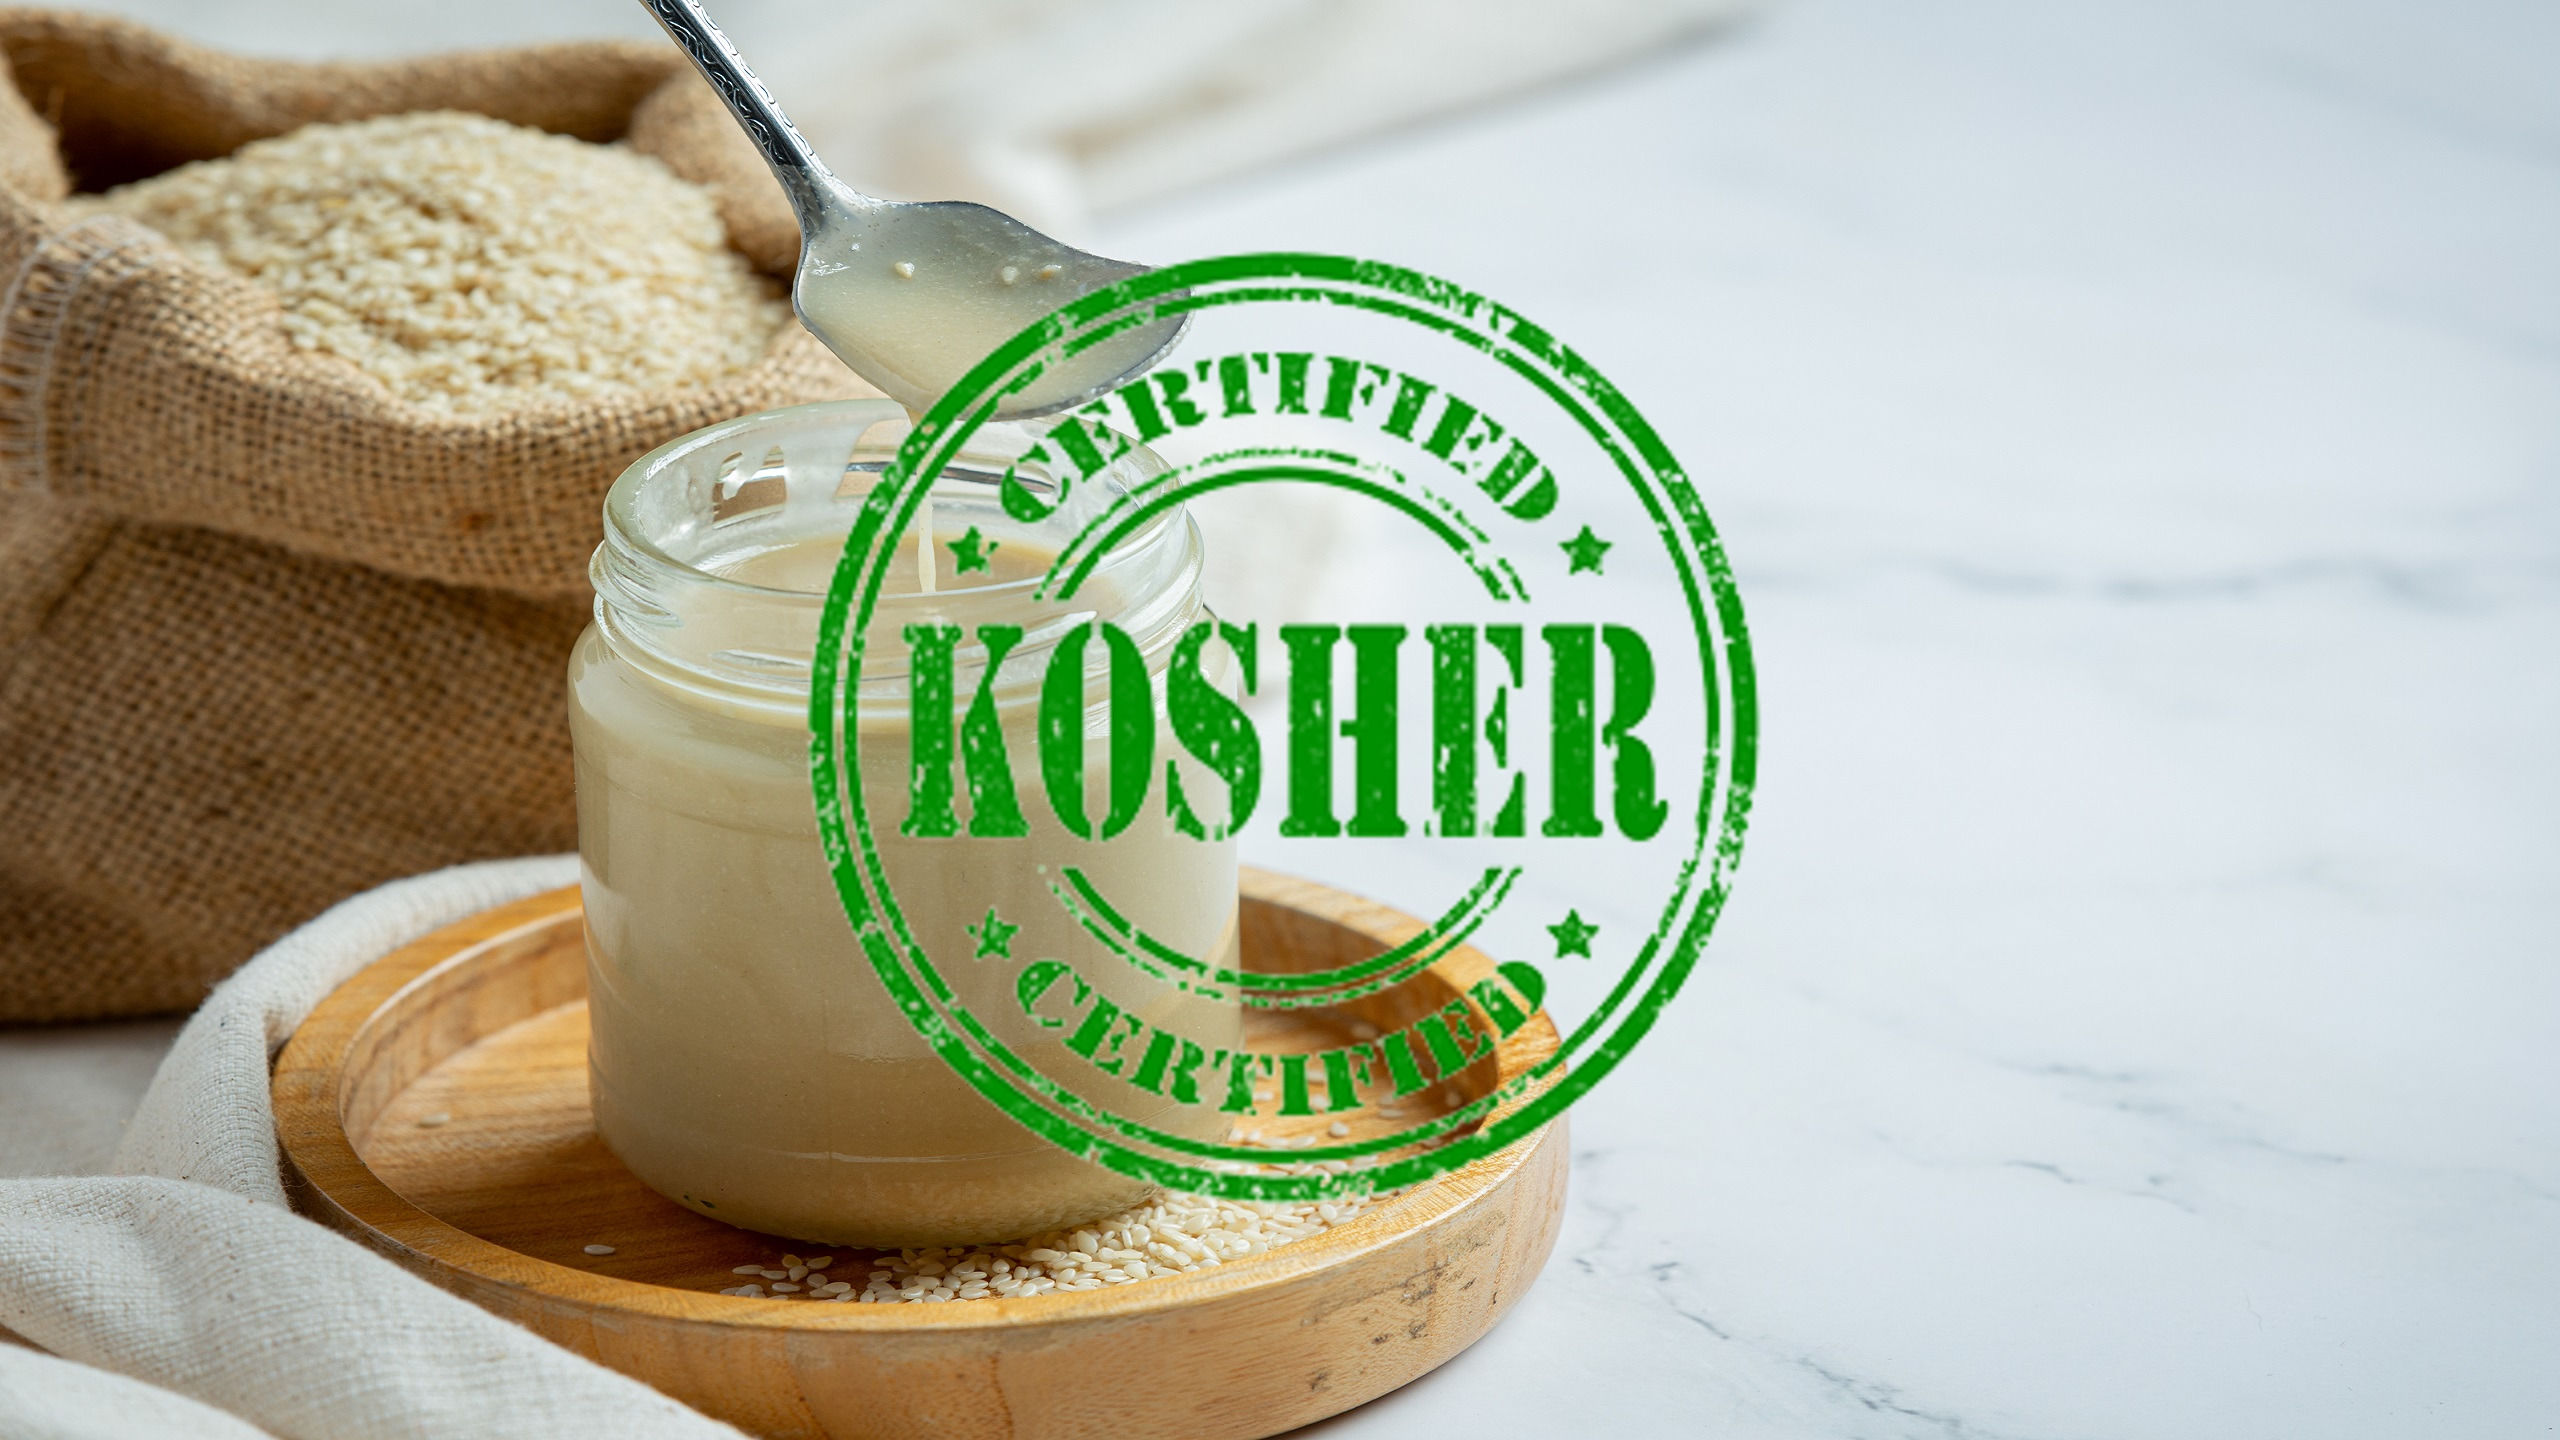 Why Palestinian Companies Can’t Obtain Kosher Certification for Their Products